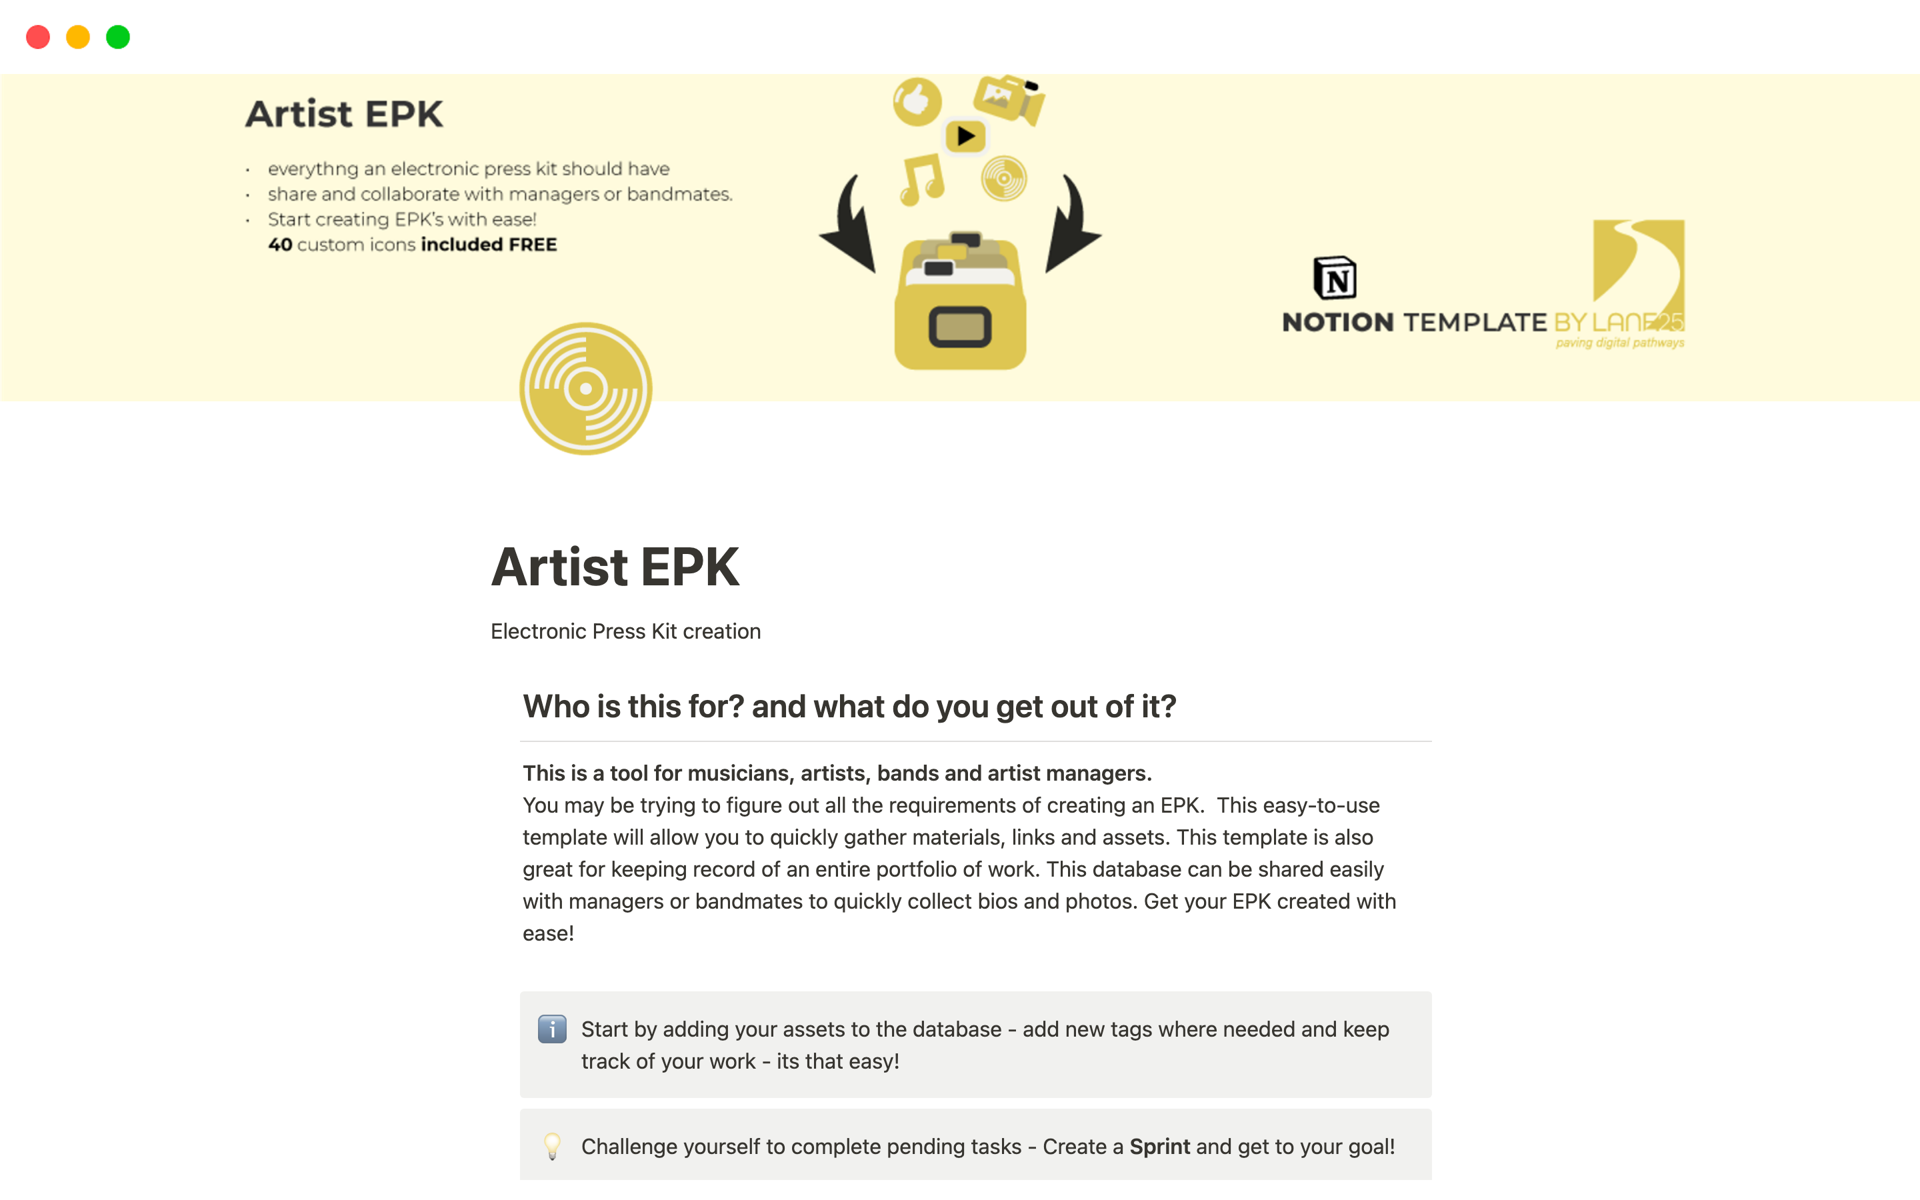 For artists and their managers who need to create one of the most powerful tools in an artists media toolkit.